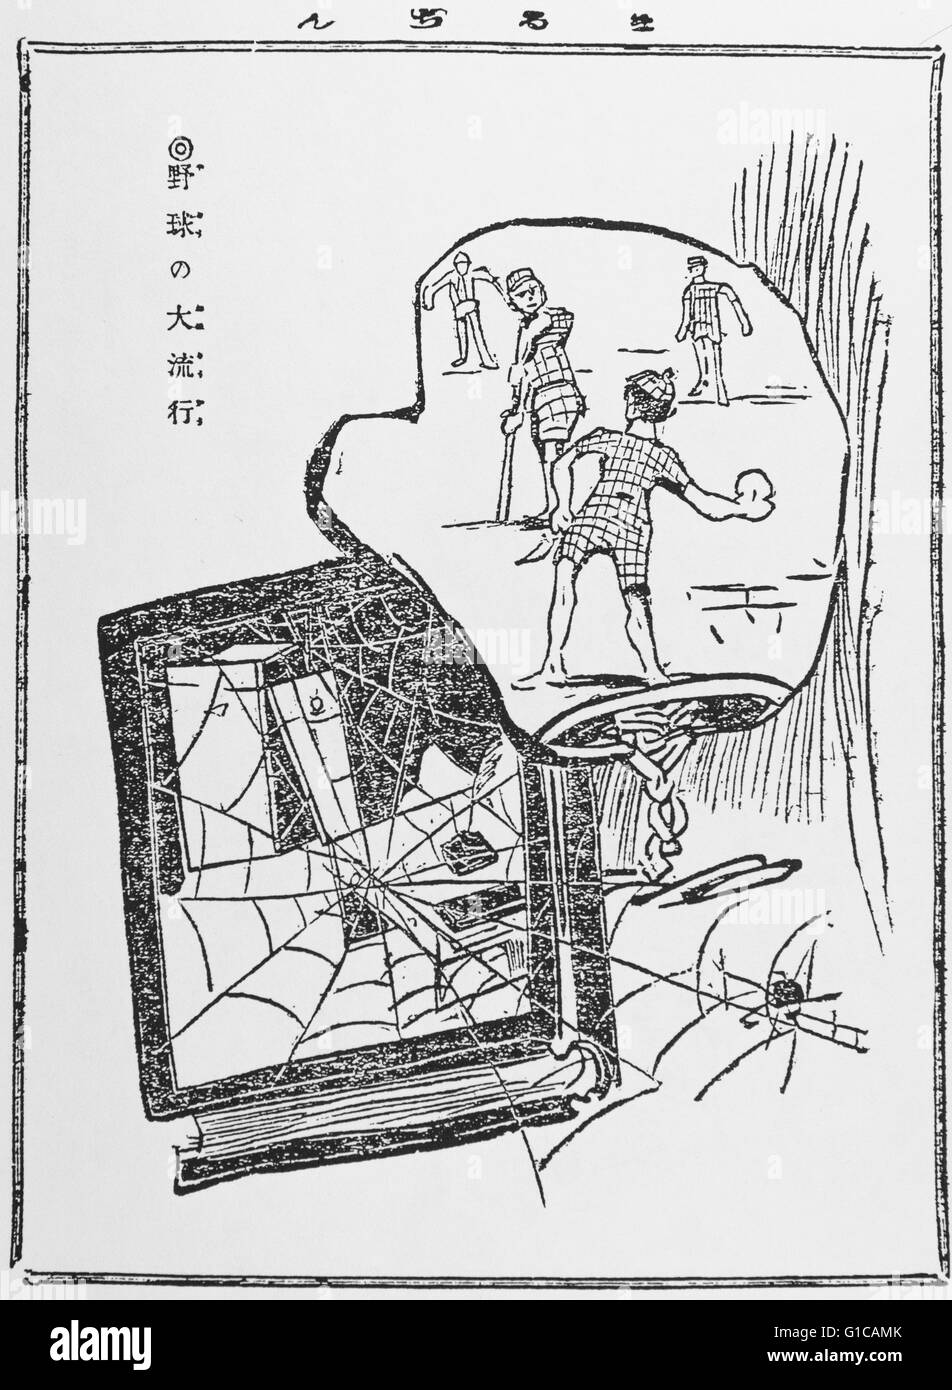 Fad of baseball, published on Maru Maru Chimbun May 5th 1906 ( 1592 ). Baseball had began since 1873 in Japan. And it became popular. This caricature satirizes study is being neglect. Artist Hirafuku Hyakusui (December 28th 1887 - October 30th 1933) Stock Photo